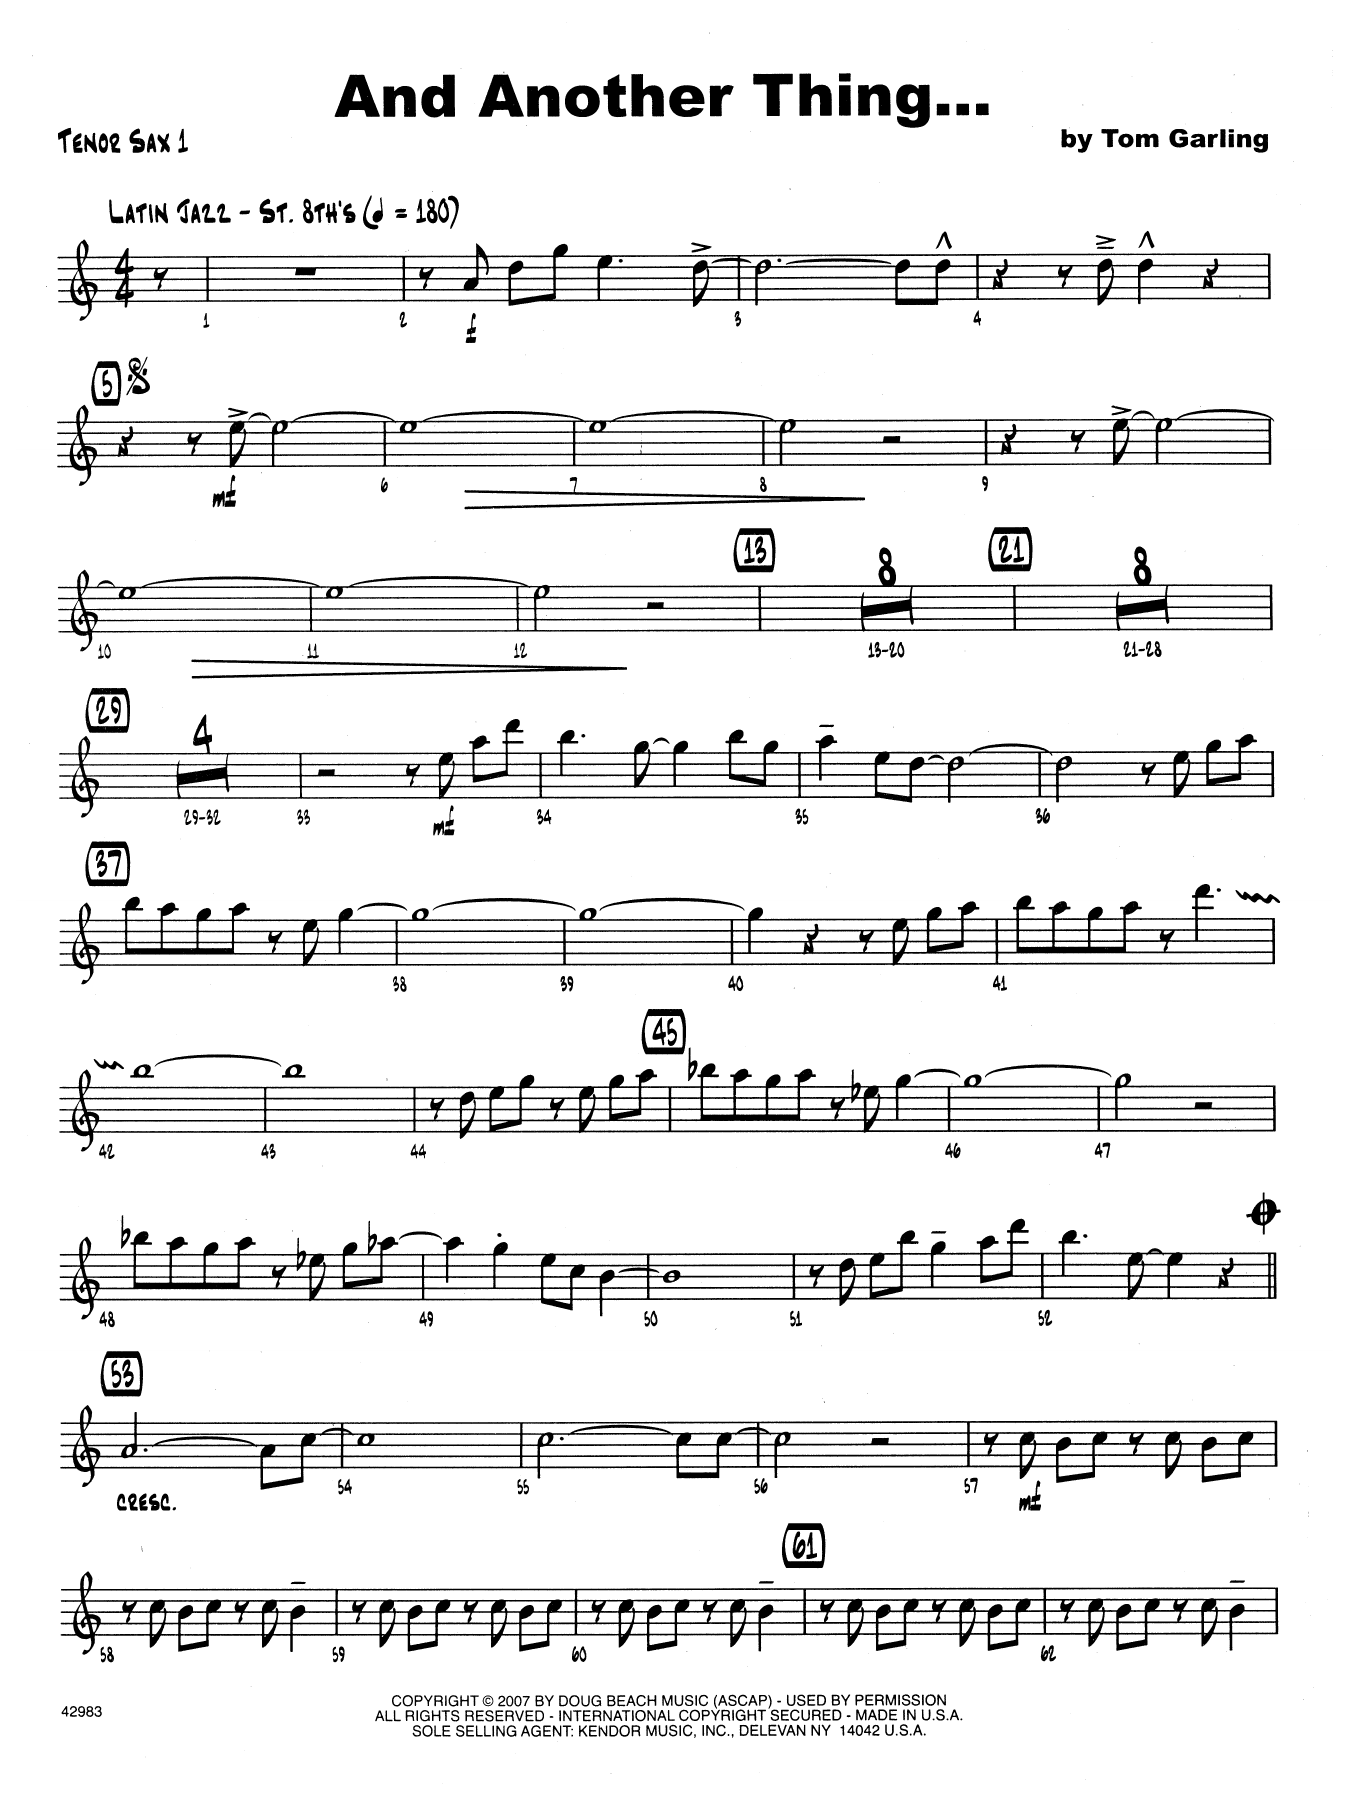 Download Tom Garling And Another Thing - 1st Tenor Saxophone Sheet Music